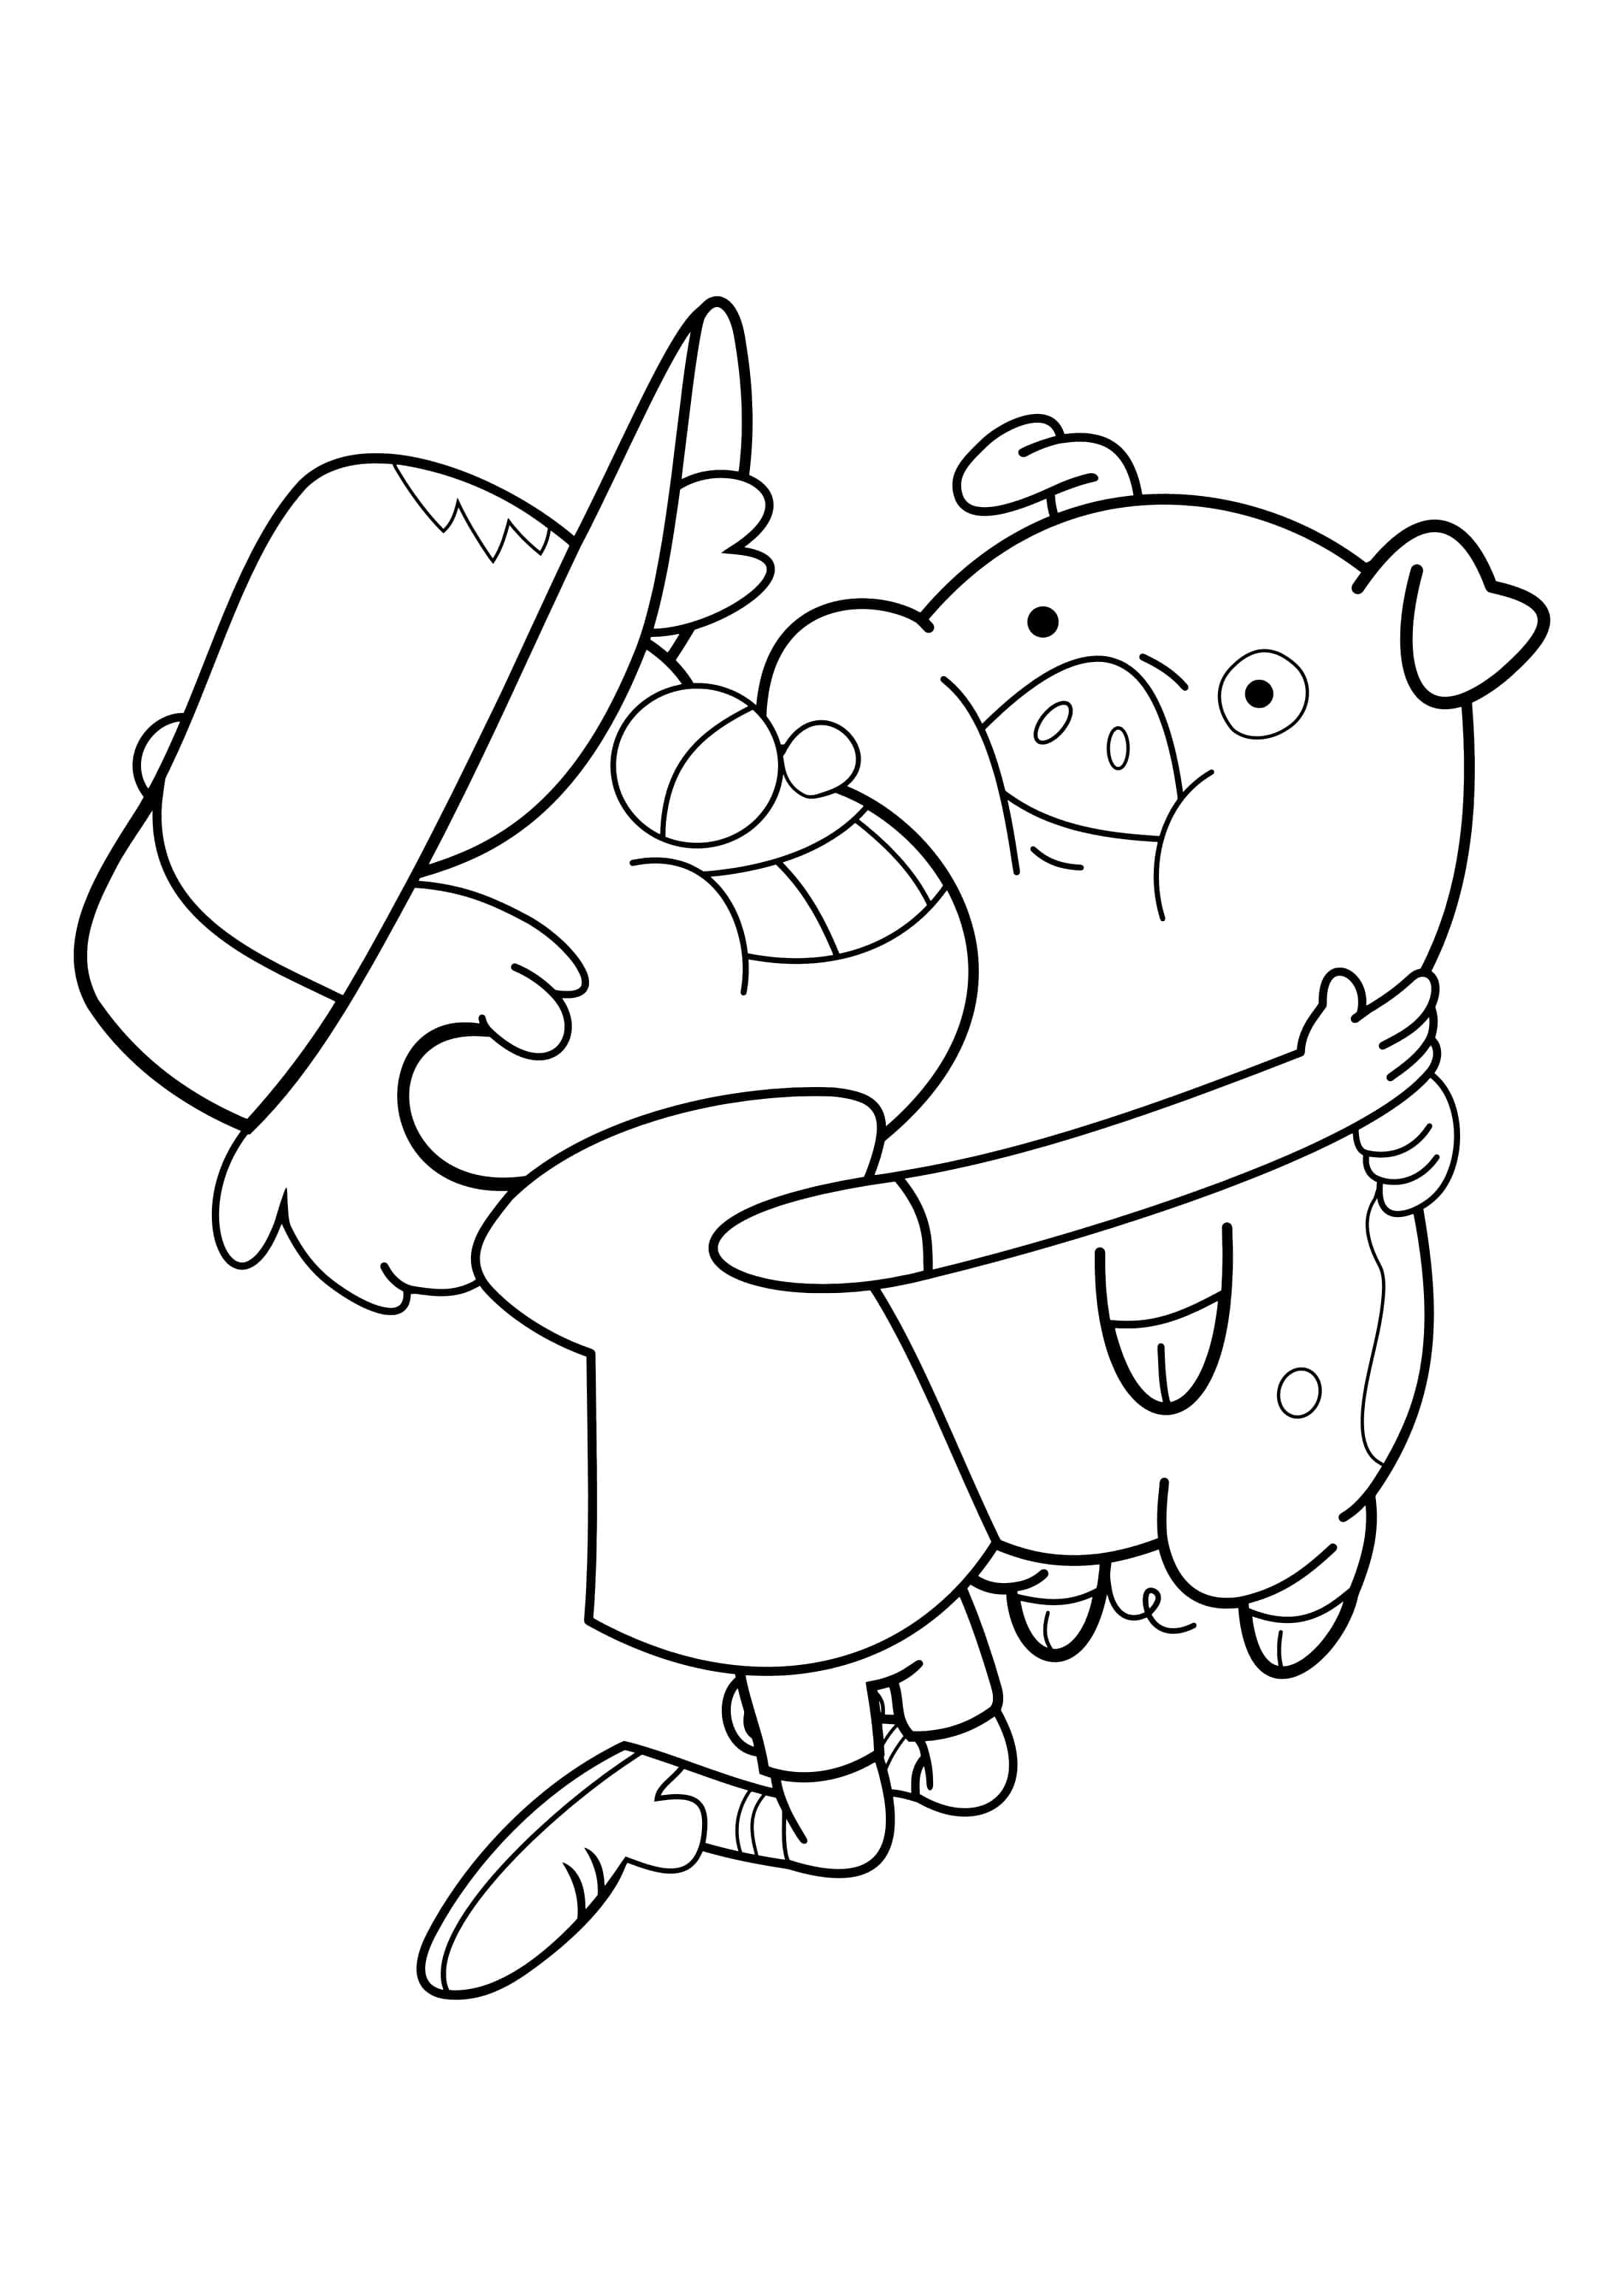 Gravity Falls Coloring Pages - Coloring Home